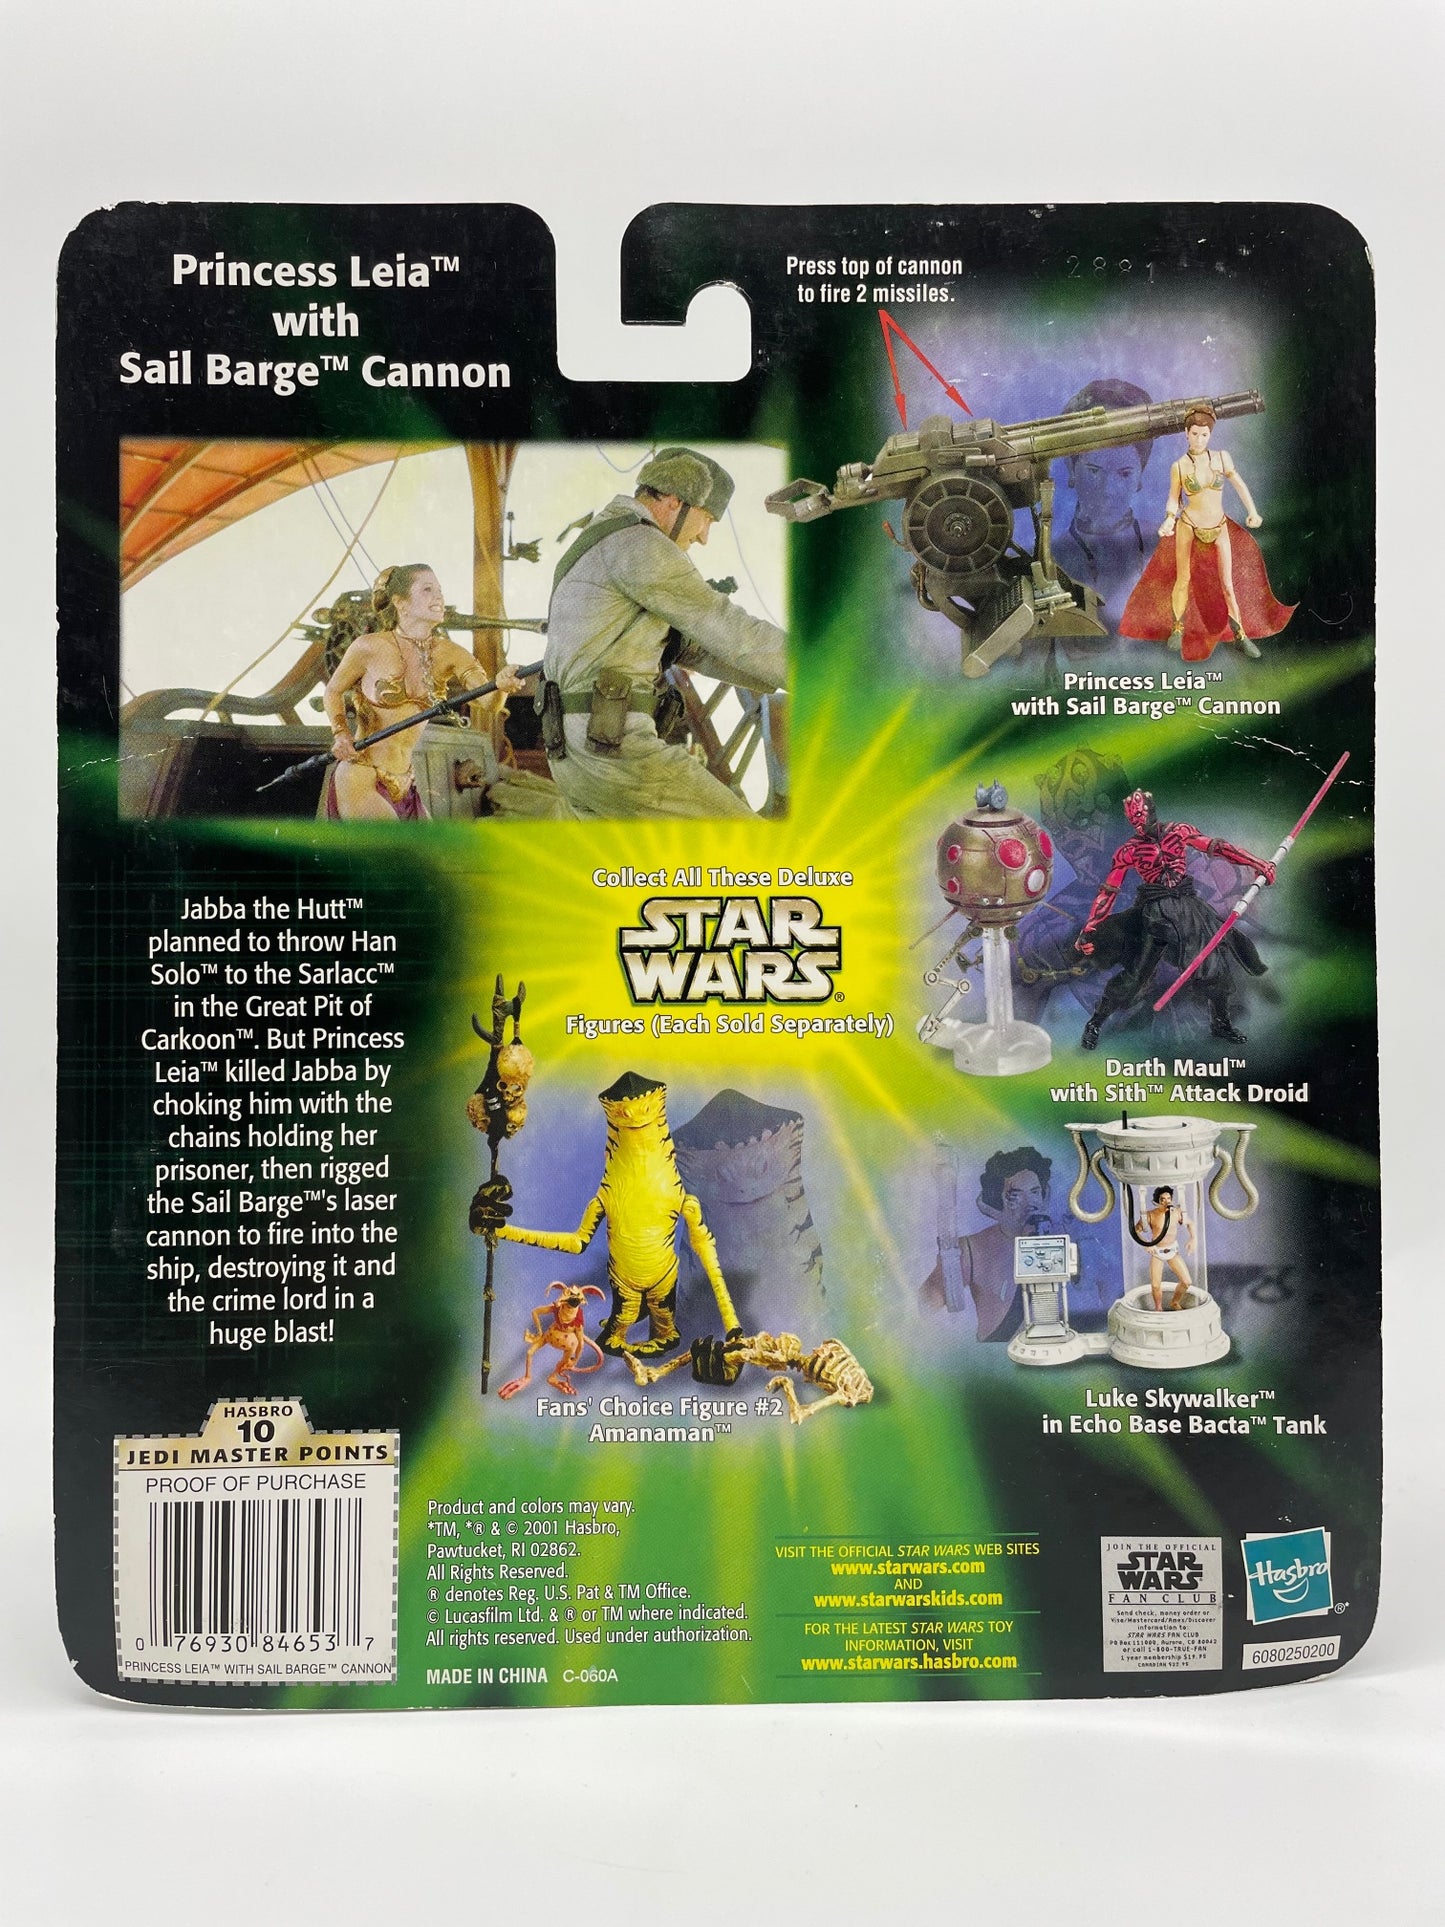 Power of the Jedi Princess Leia Sail Barge Cannon Deluxe Figure